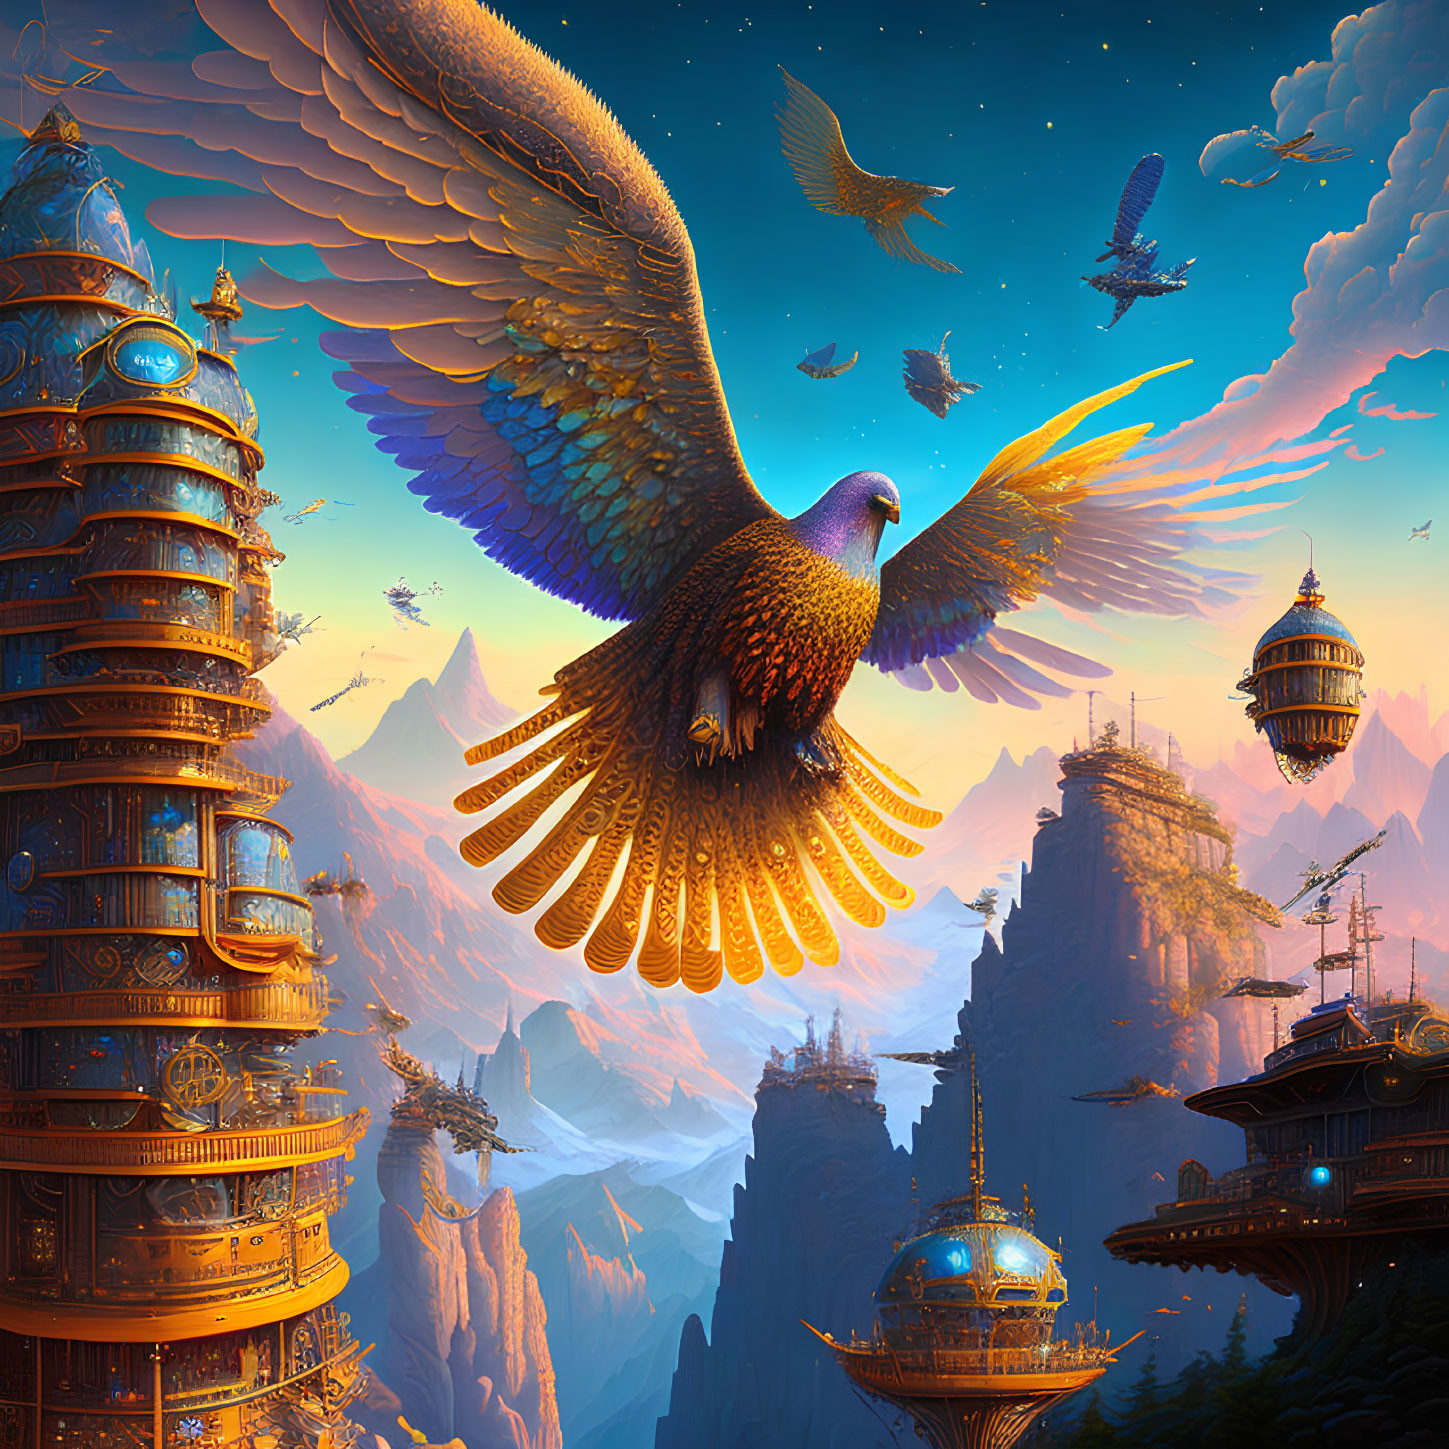 Giant eagle soaring over ornate towers and cliffs in fantastical landscape